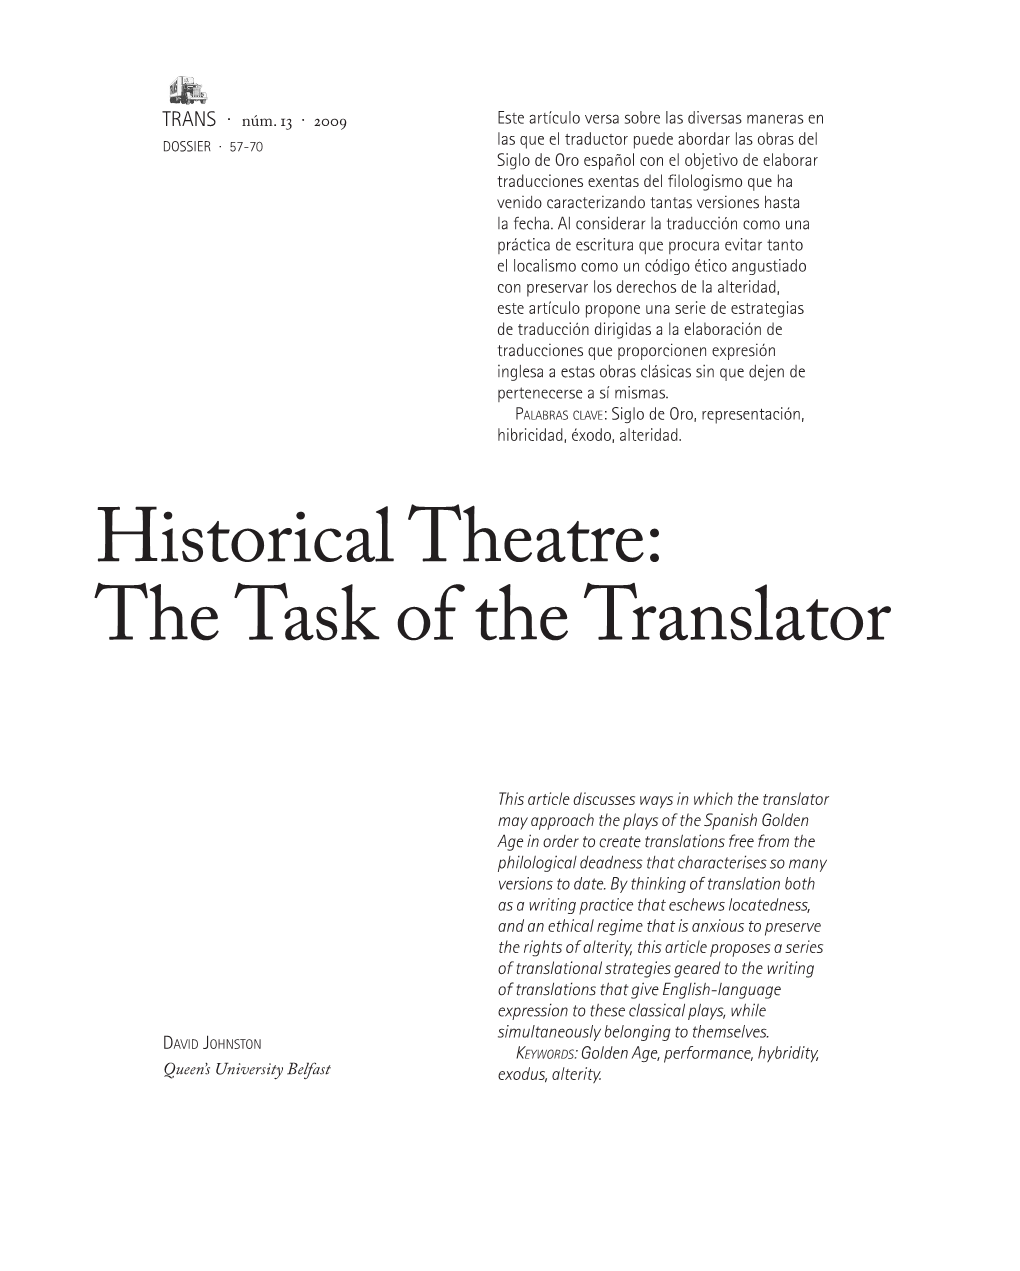 Historical Theatre: the Task of the Translator